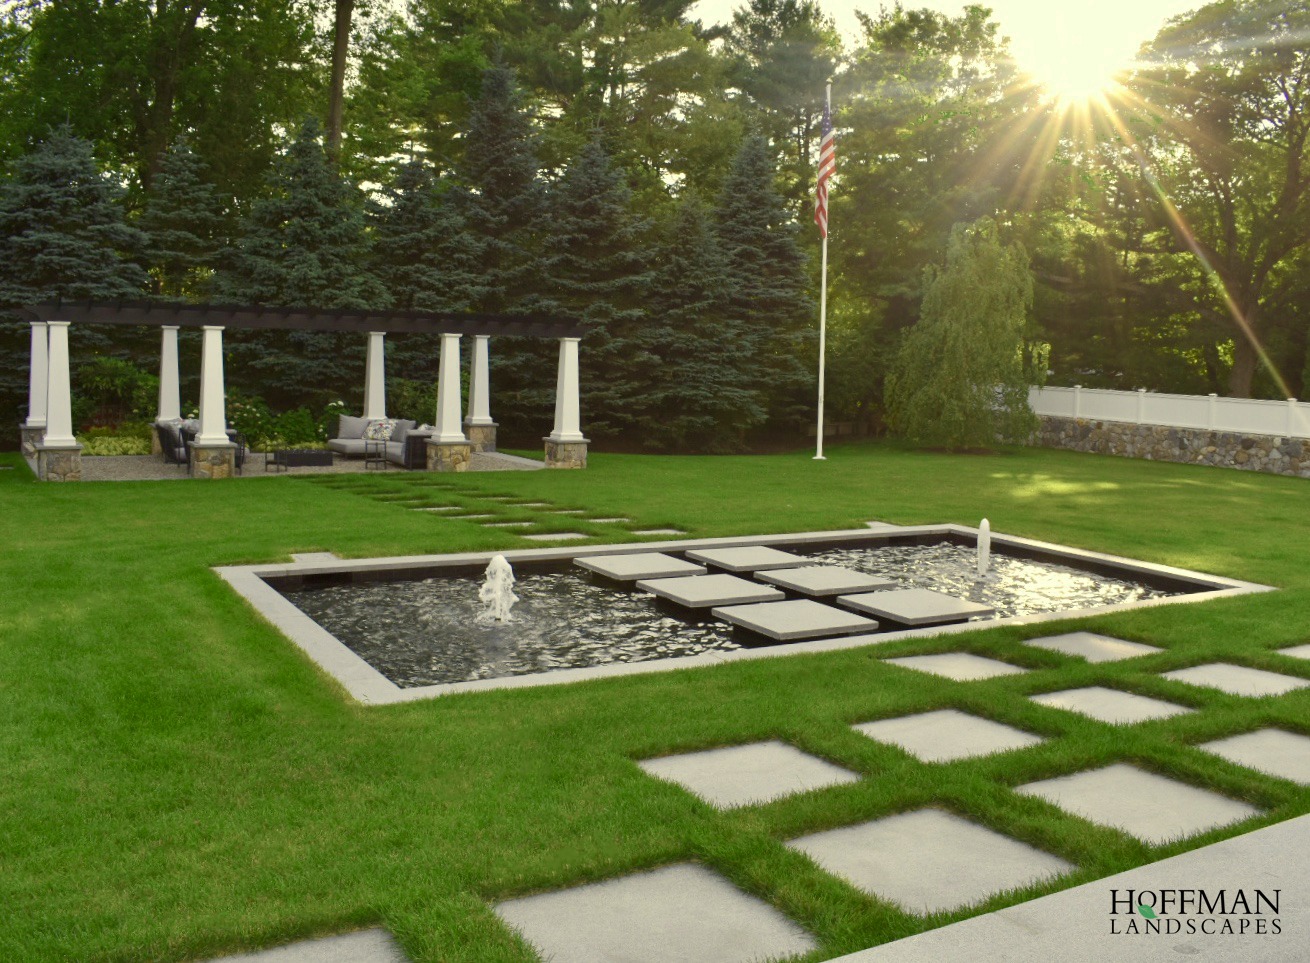 An elegant garden with a water feature and stepping stones, framed by tall columns, plush greenery, and a flagpole under a radiant sun.